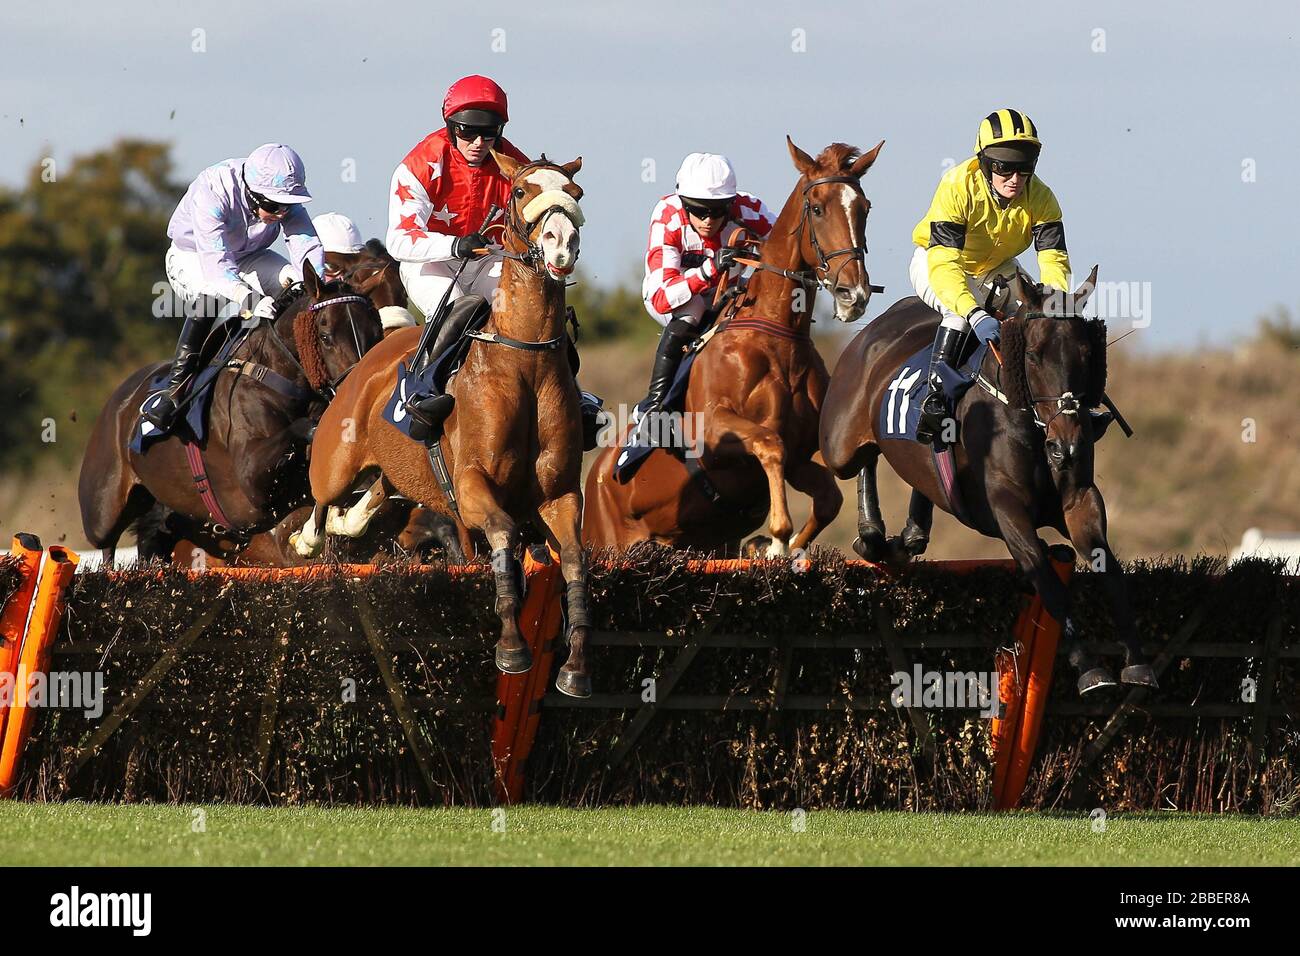 Topenhall ridden by Charlie Poste (R) and Beausang ridden by Paul Moloney jump together during the Warrens of Warwick 34 Years Anniversary Handicap Hu Stock Photo